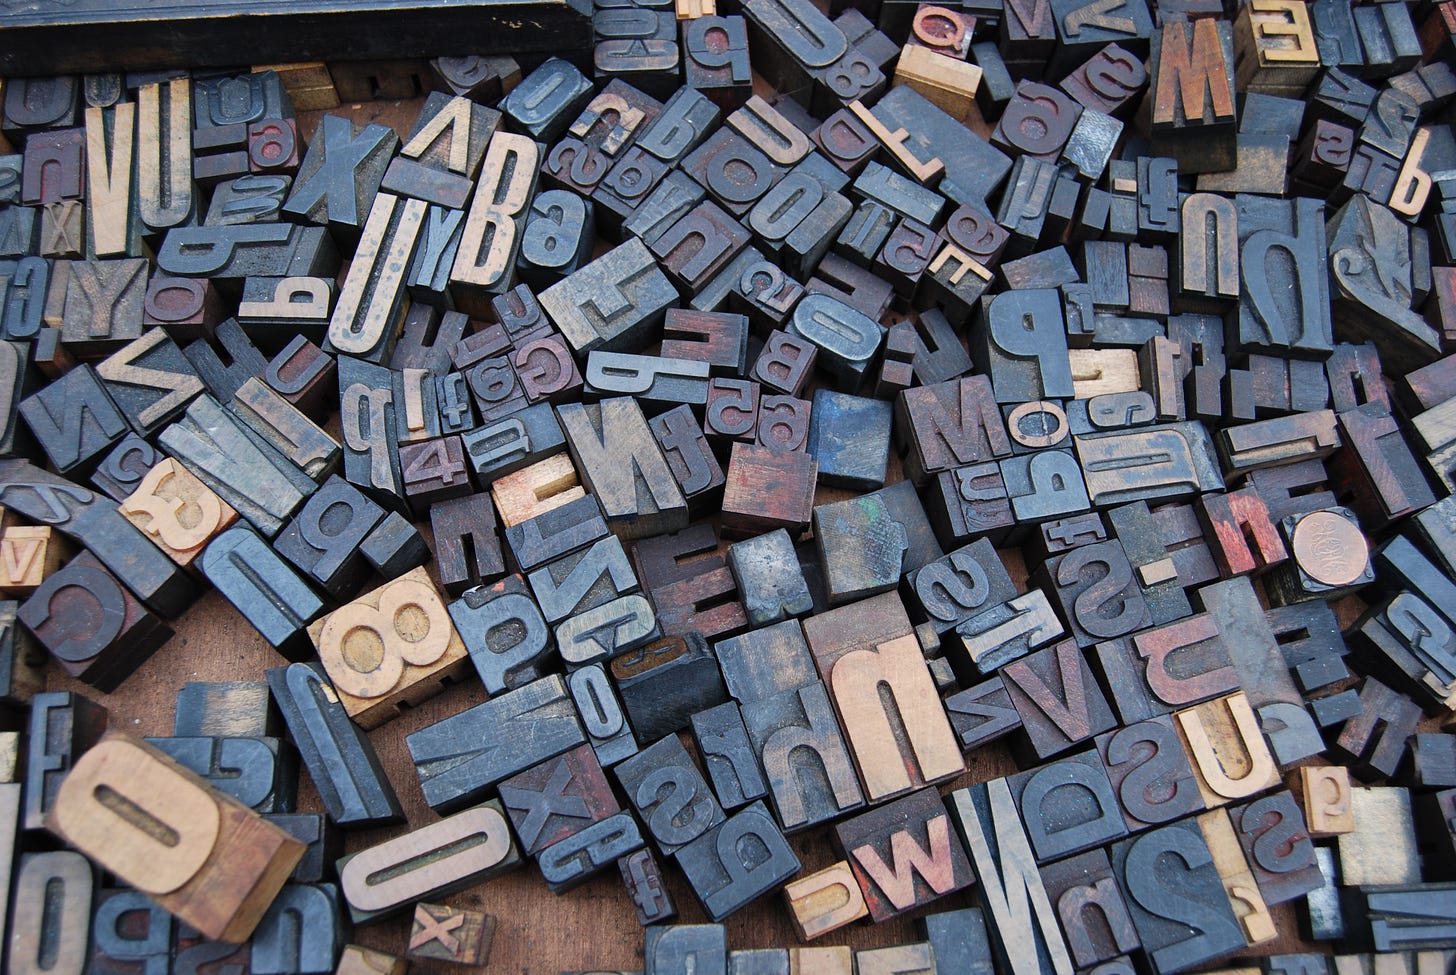 A series of typographical blocks piled together.